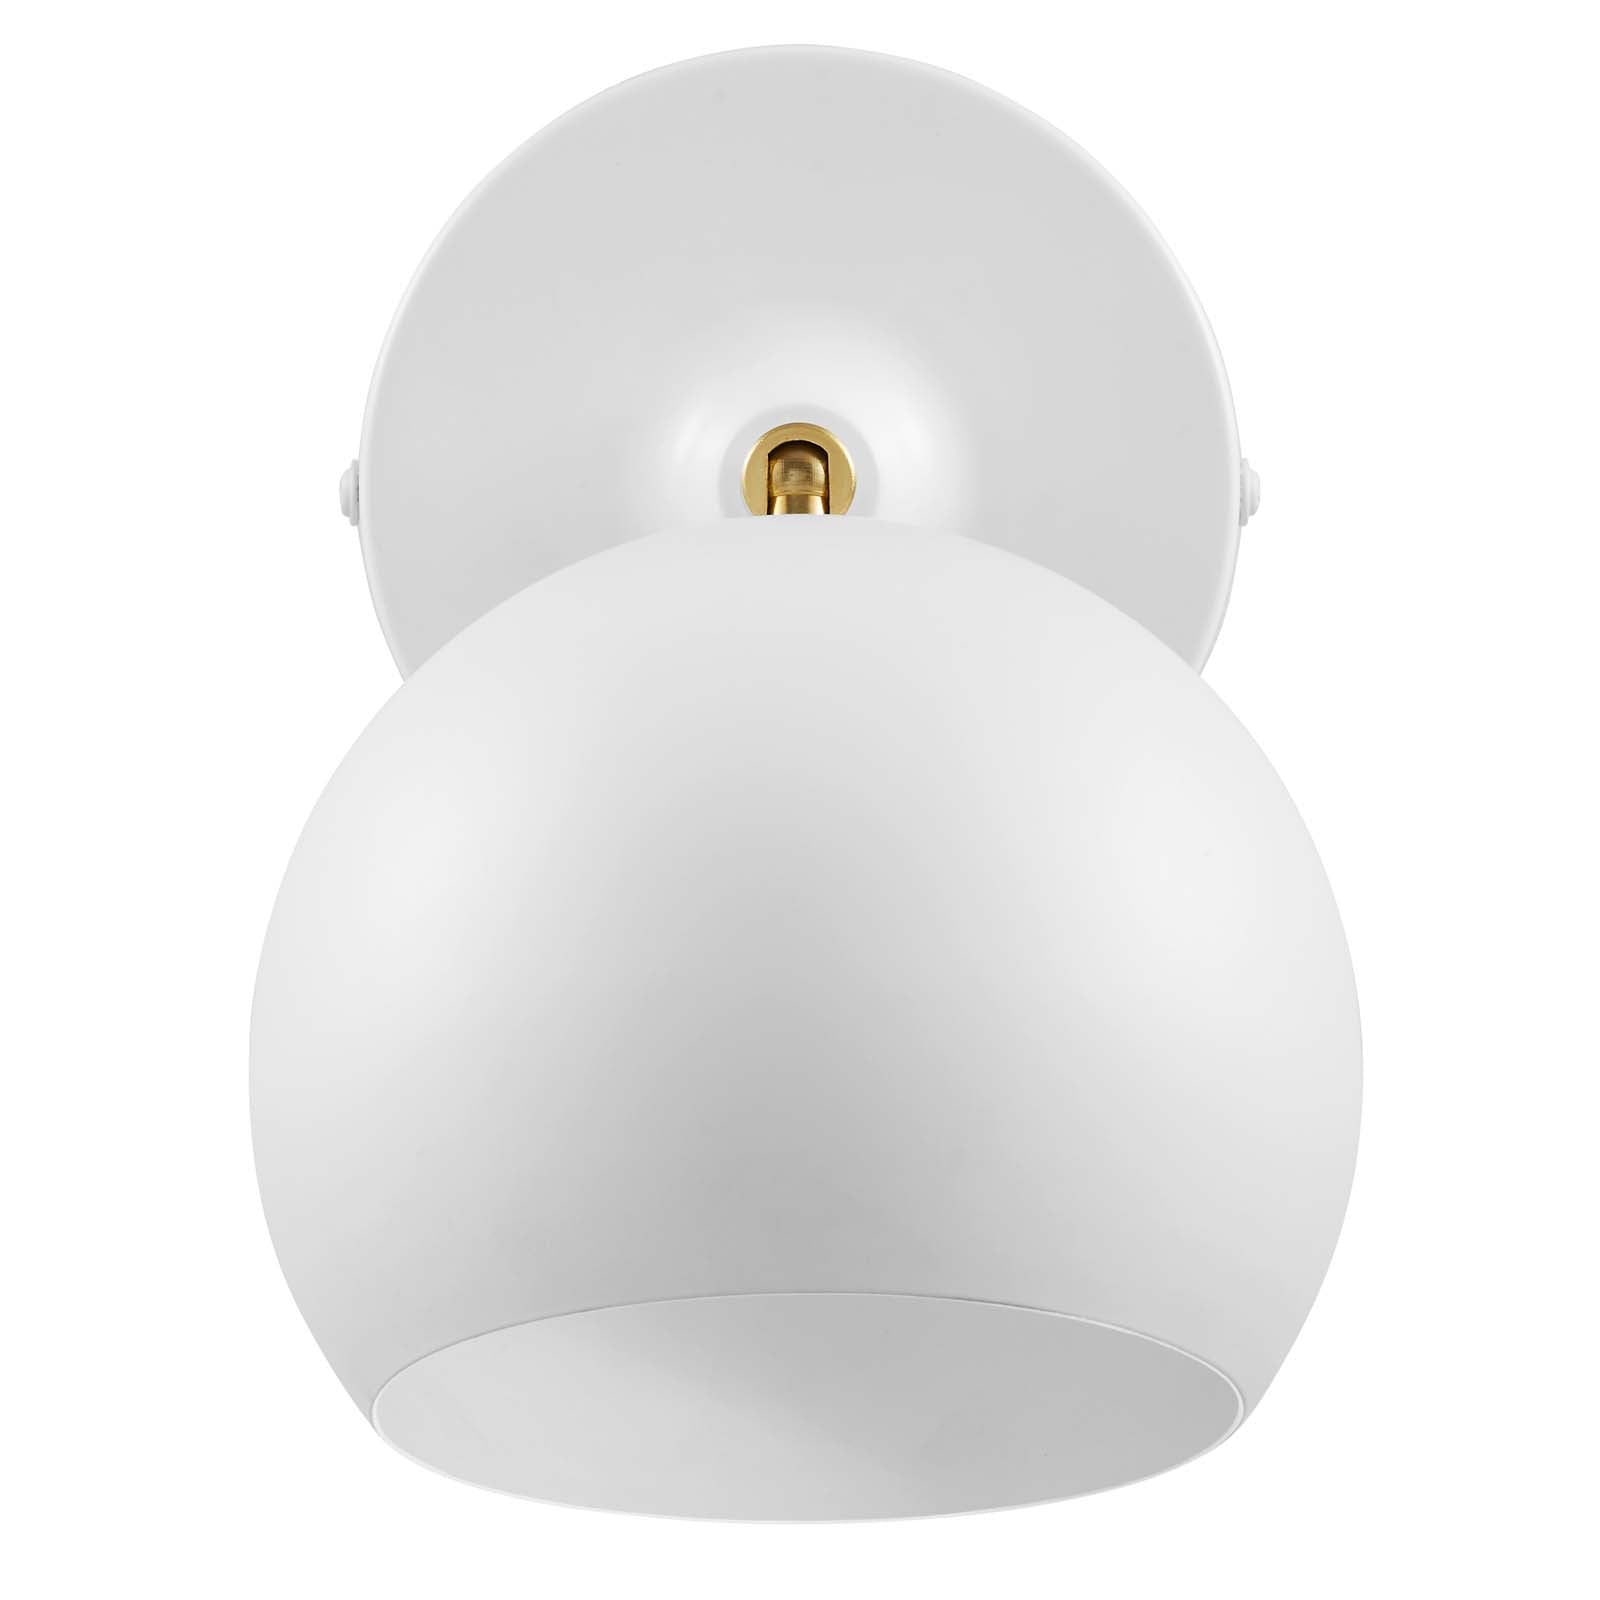 Chalice 4" Swing-Arm Metal Wall Sconce - East Shore Modern Home Furnishings